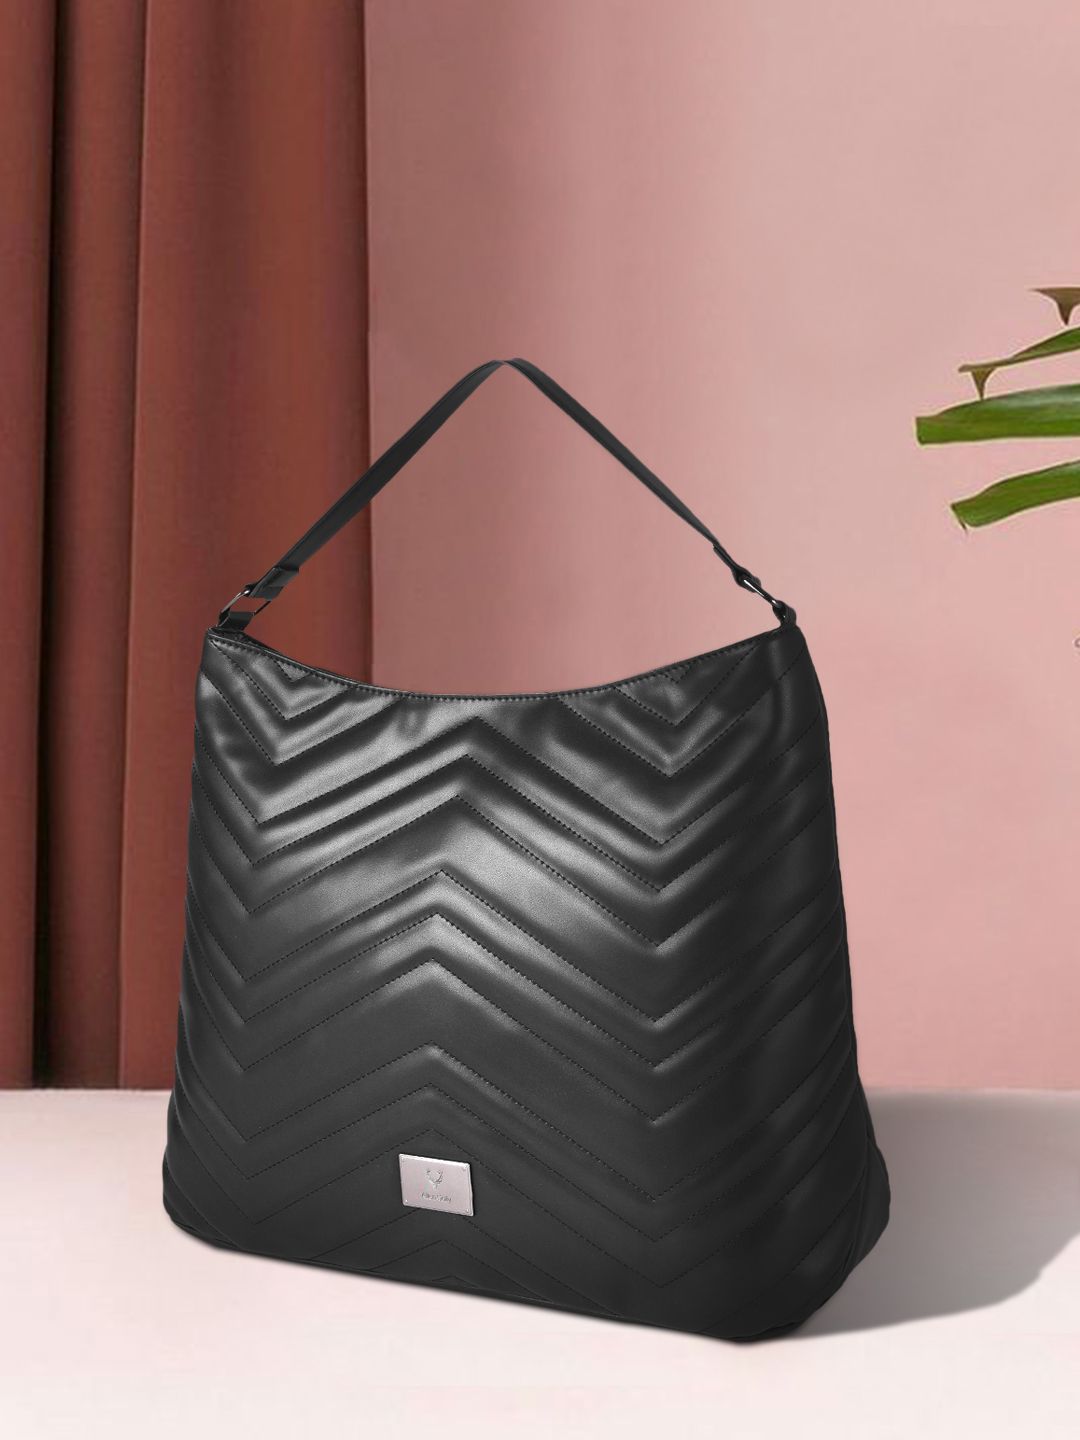 Allen Solly Black Textured PU Structured Hobo Bag Price in India